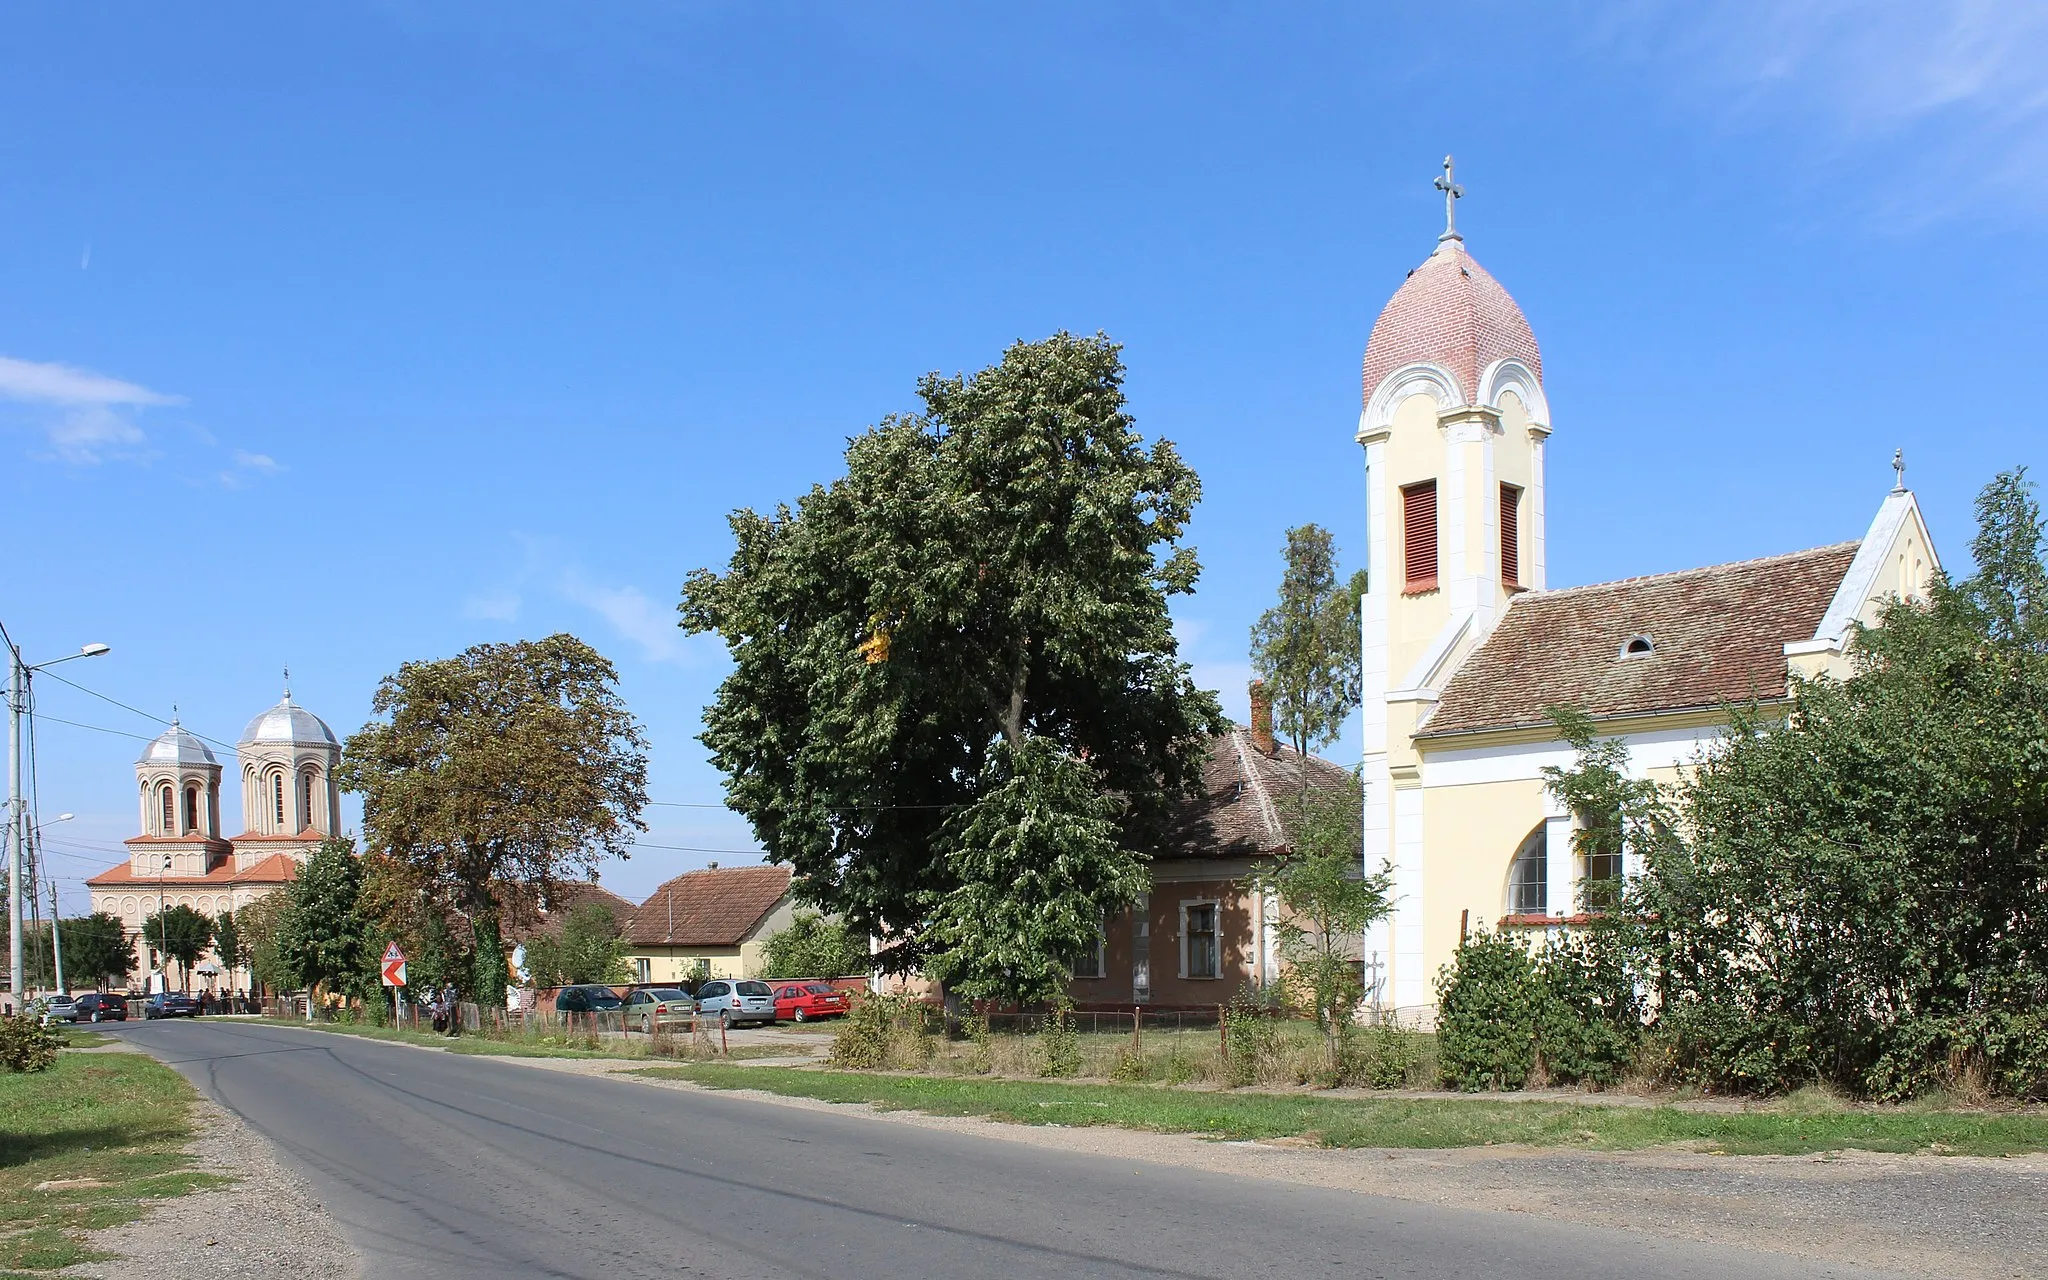 Photo showing: Stretch between the two churches on DN682, Zăbrani, Arad county, Romania, the 19th century